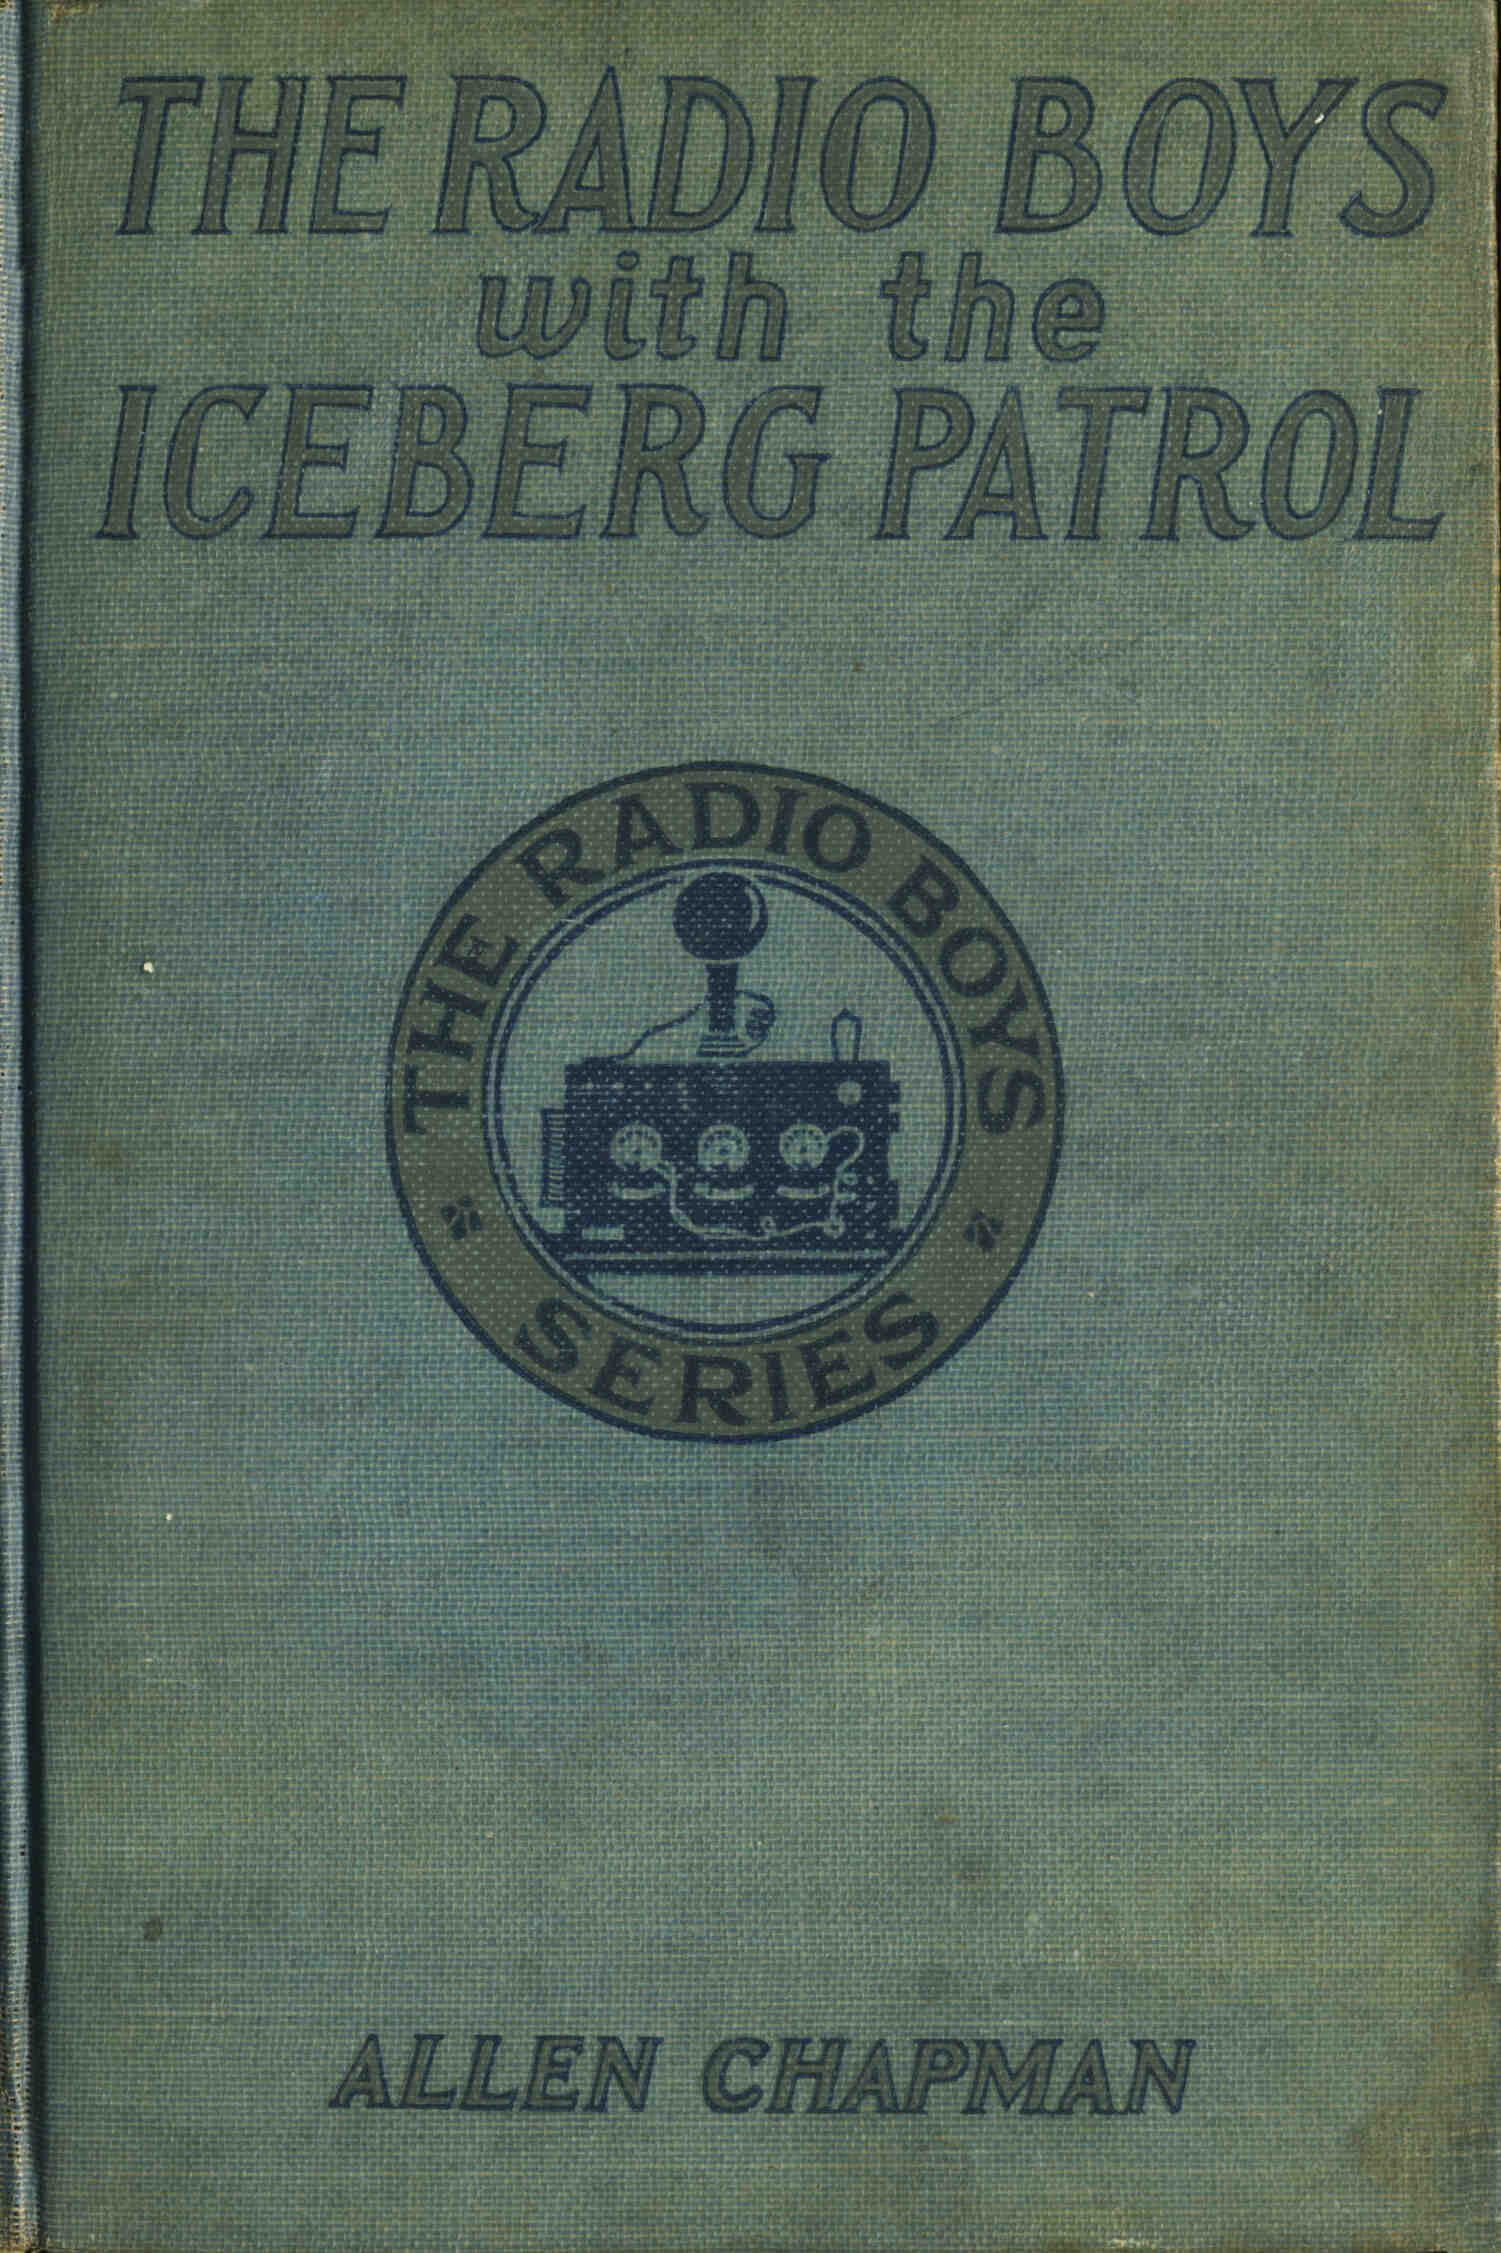 The Radio Boys with the Iceberg Patrol; Or, Making safe the ocean lanes